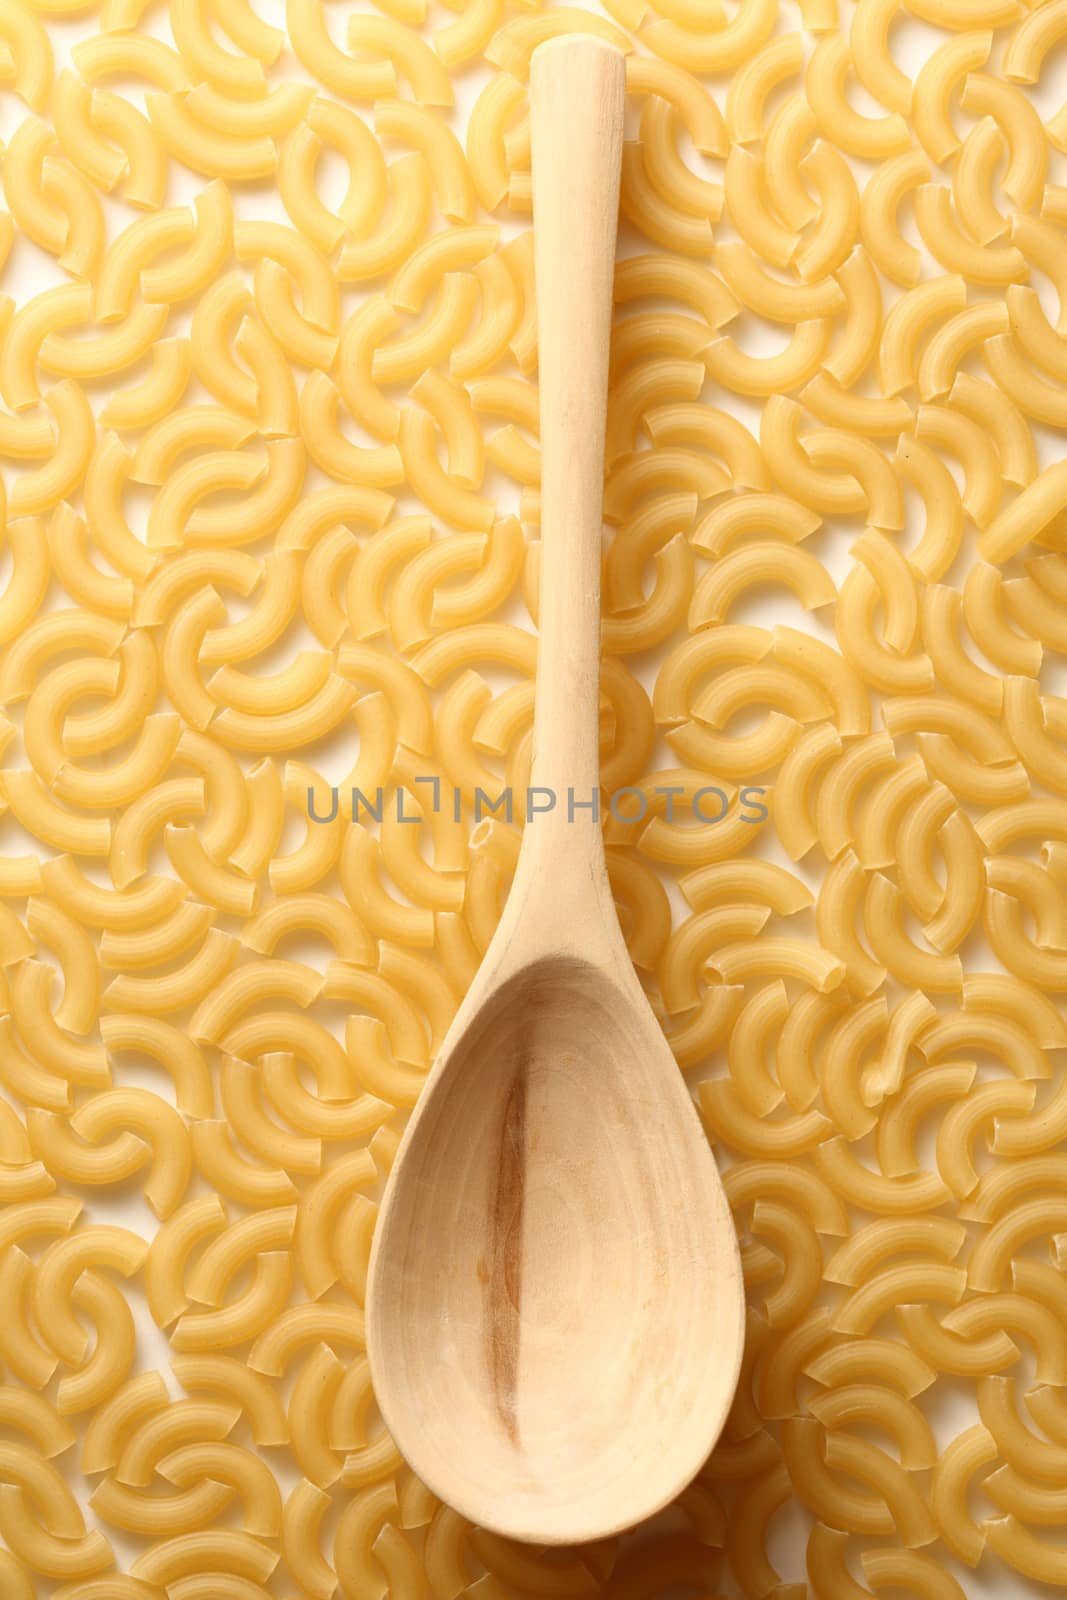 Short ribbed pasta tubes background with spoon